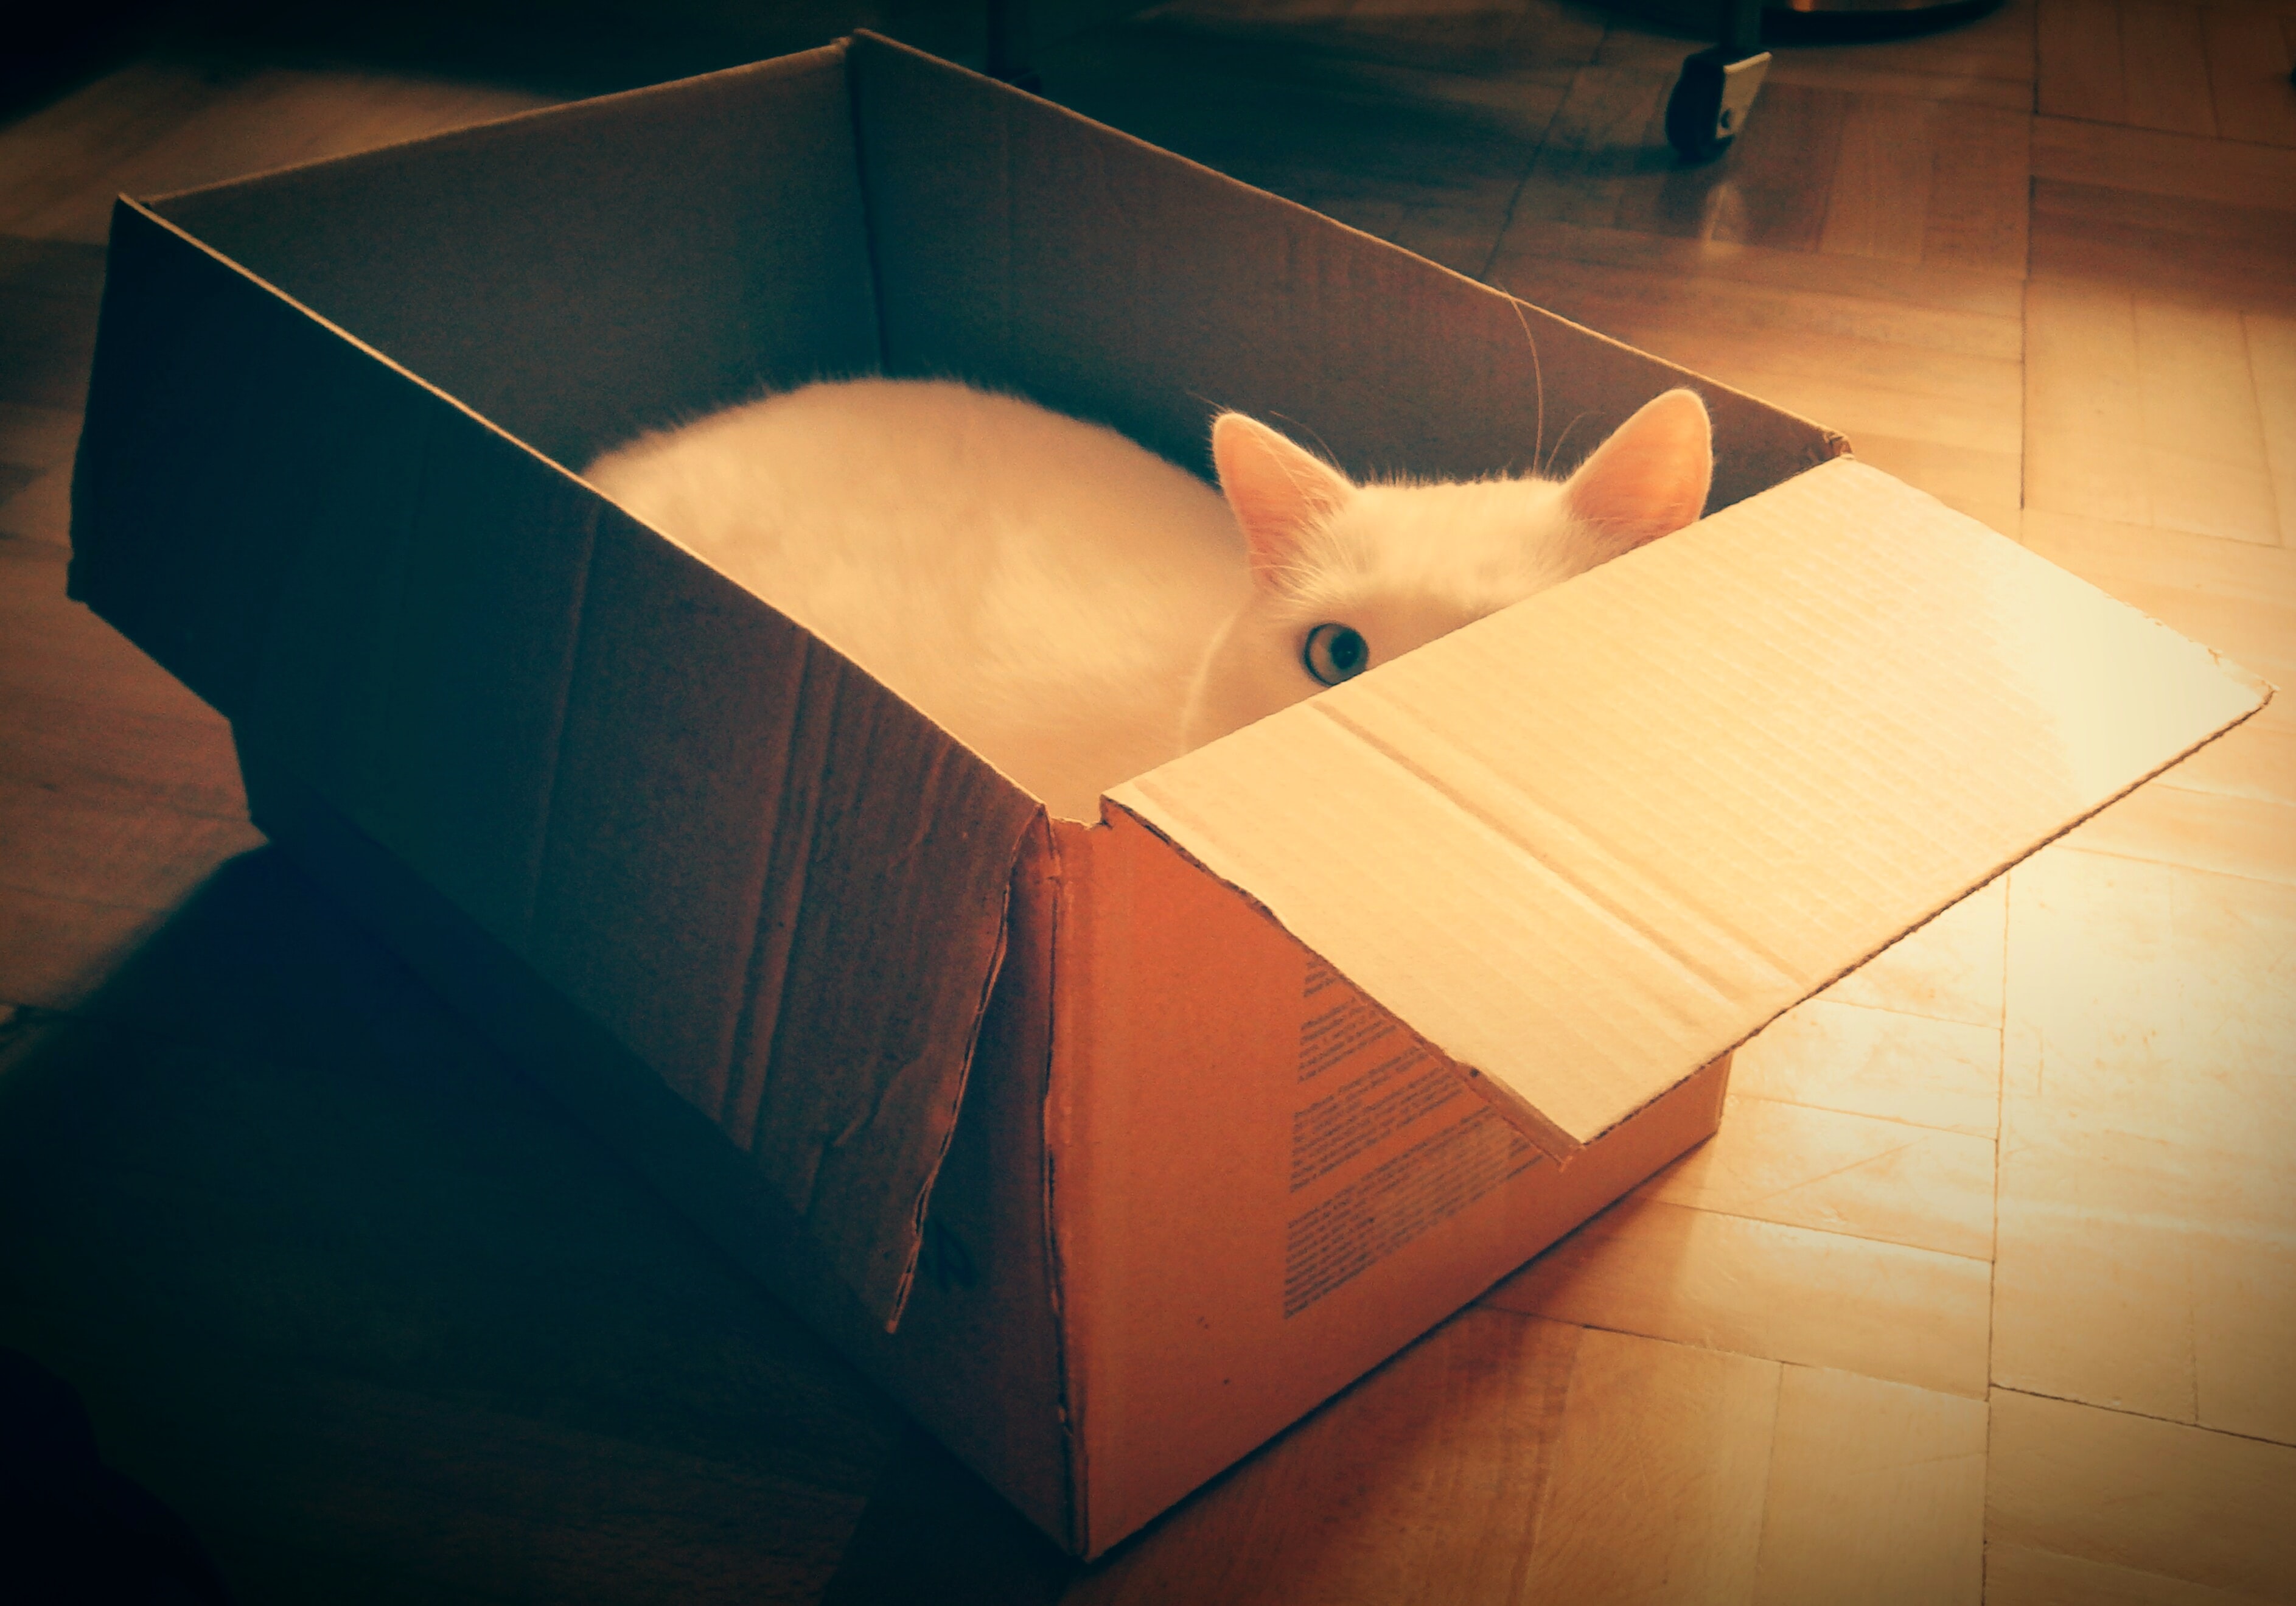 a white cat in a box with one eye covered by the box